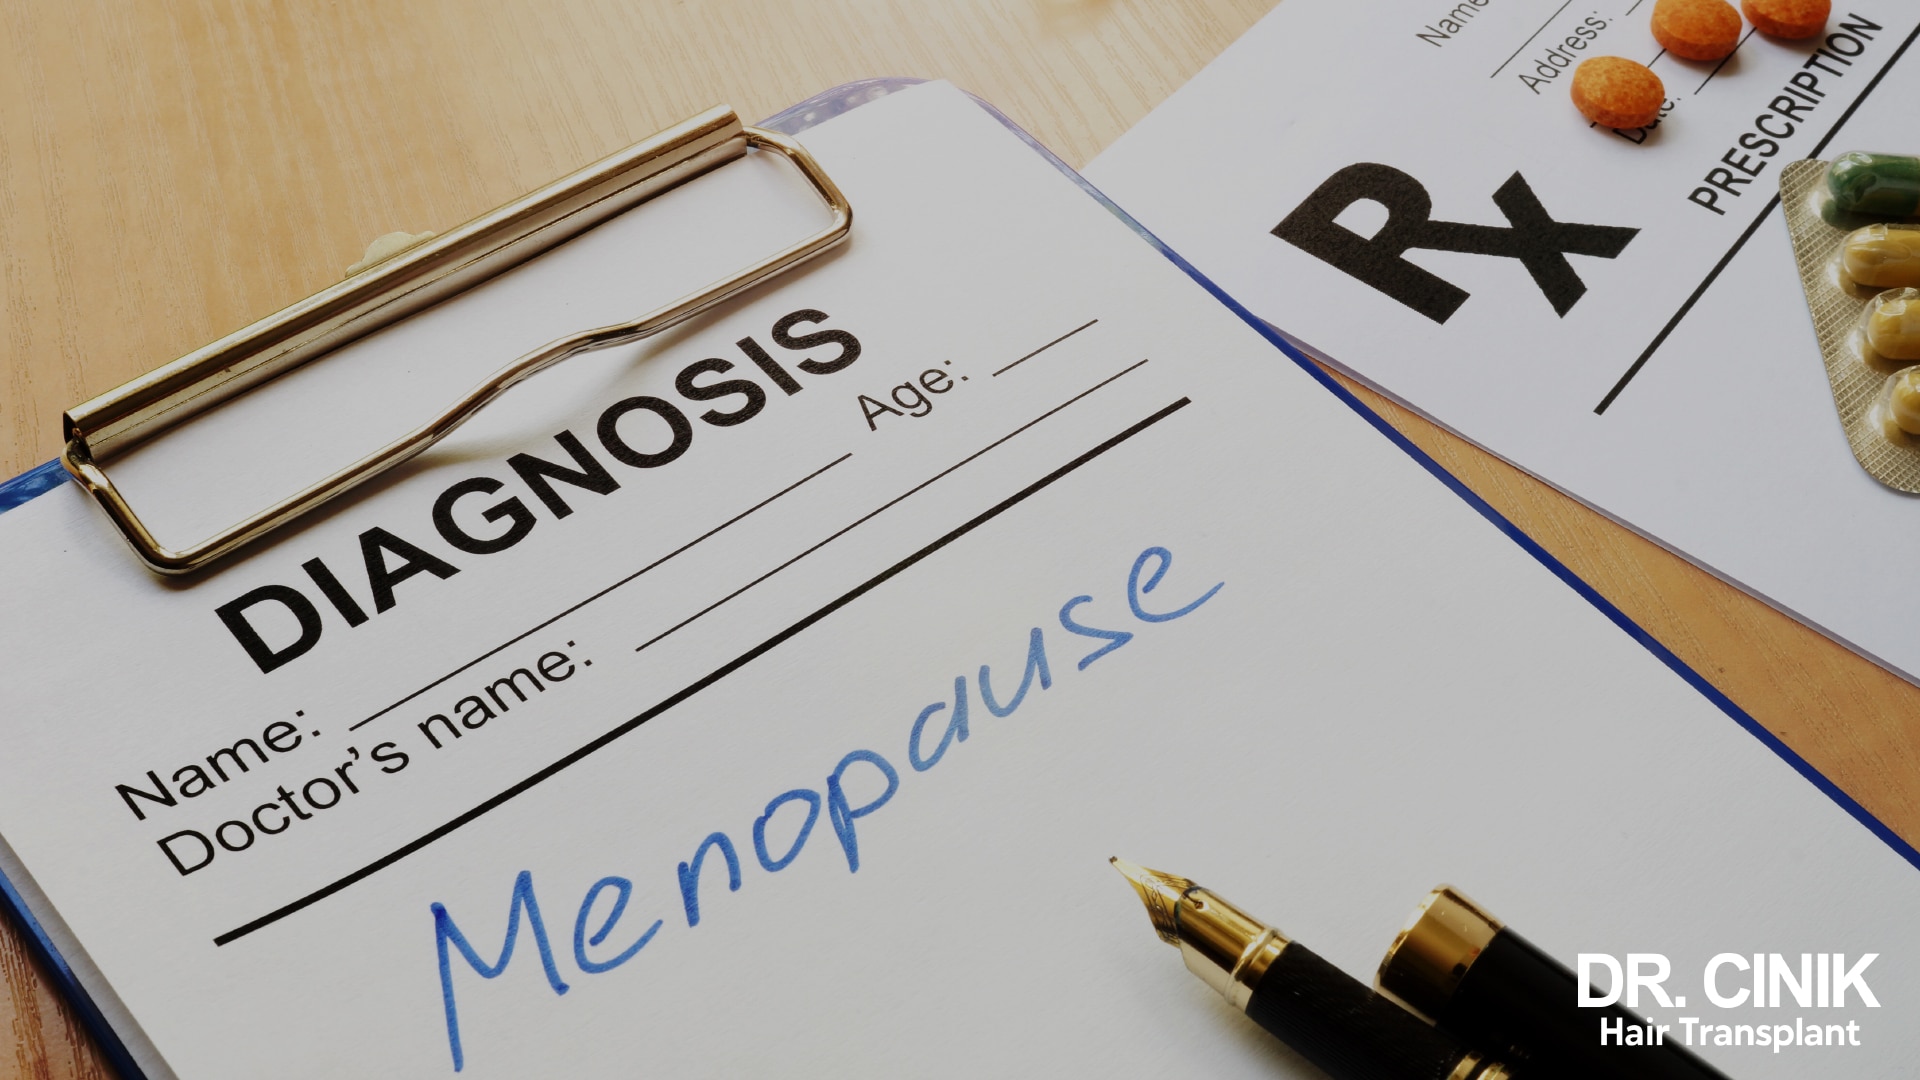 An illustrative image delivers a straightforward diagnosis: menopause is the culprit behind this hair loss